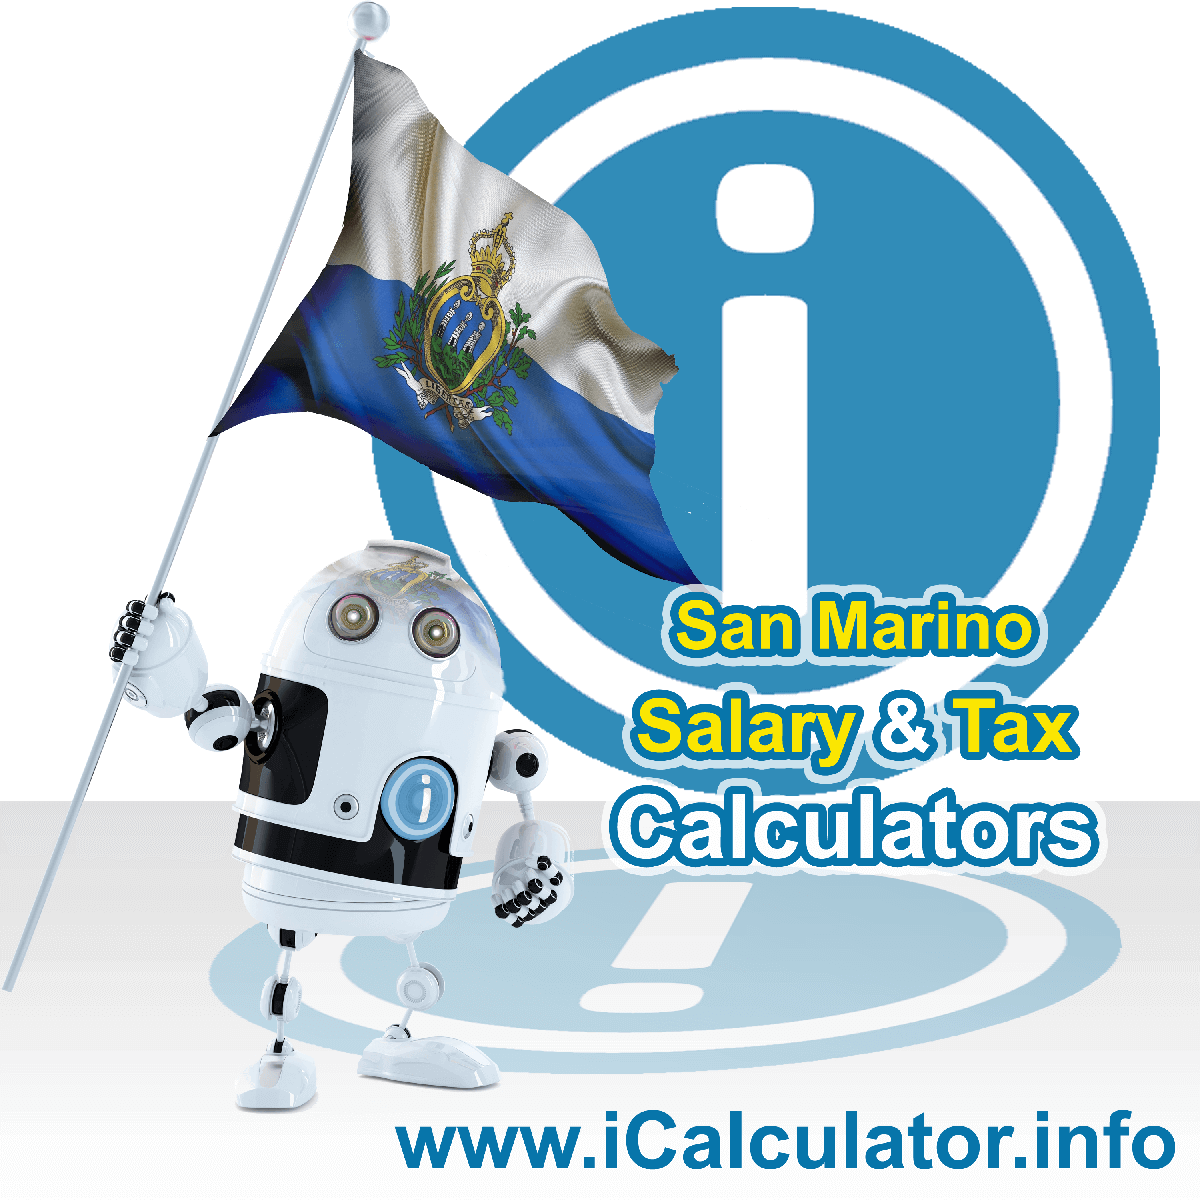 San Marino Tax Calculator. This image shows the San Marino flag and information relating to the tax formula for the San Marino Salary Calculator